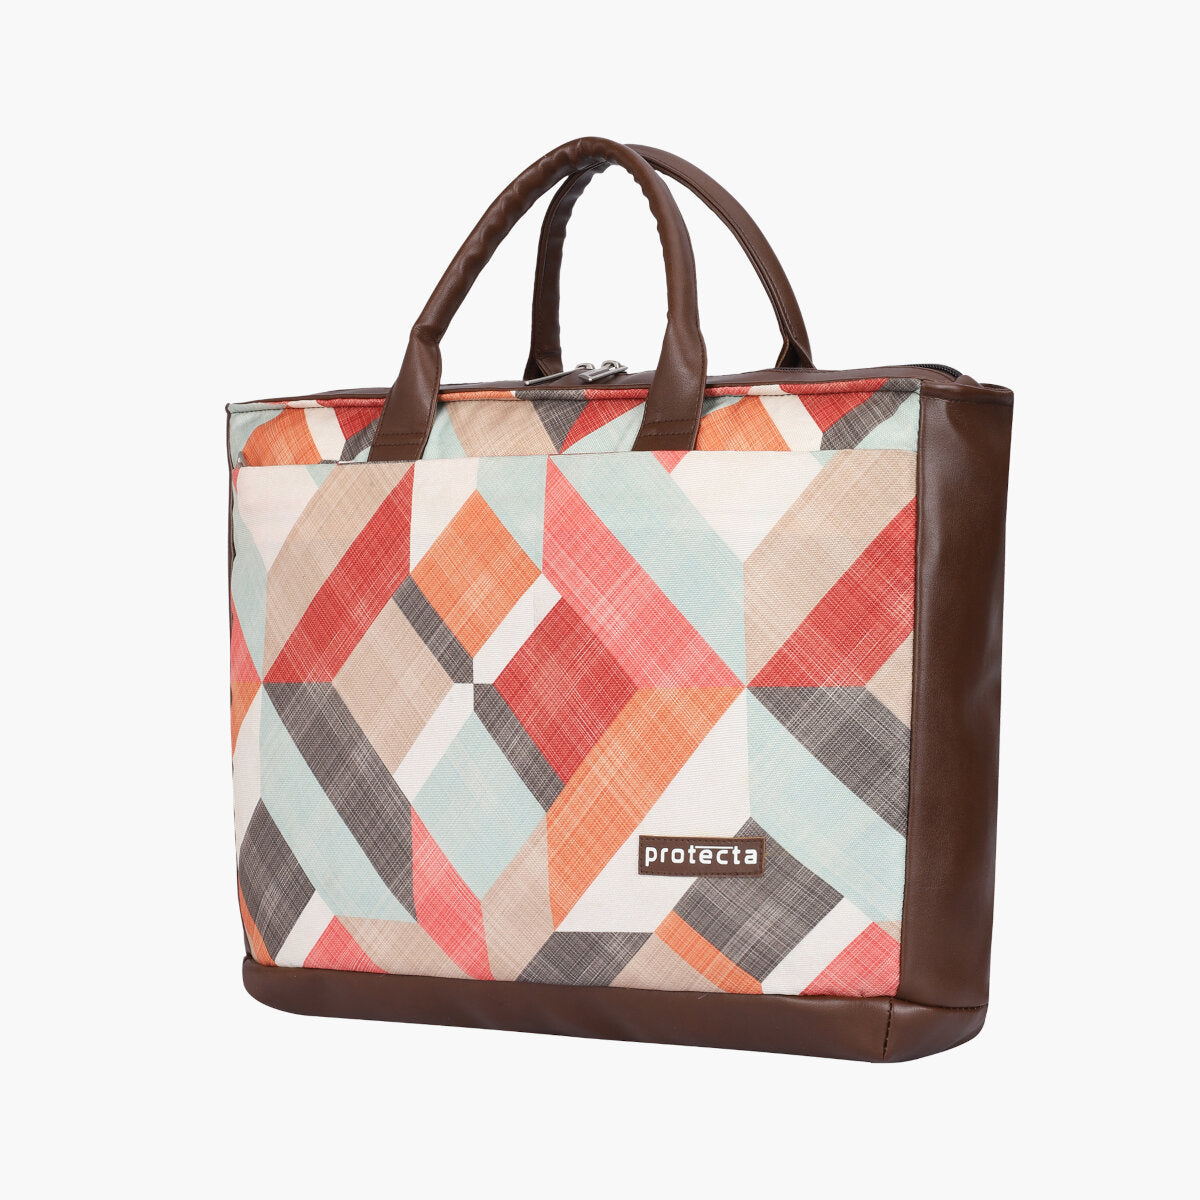 Geometric Print | Protecta Evenly Poised Office Laptop Bag for Women - 2